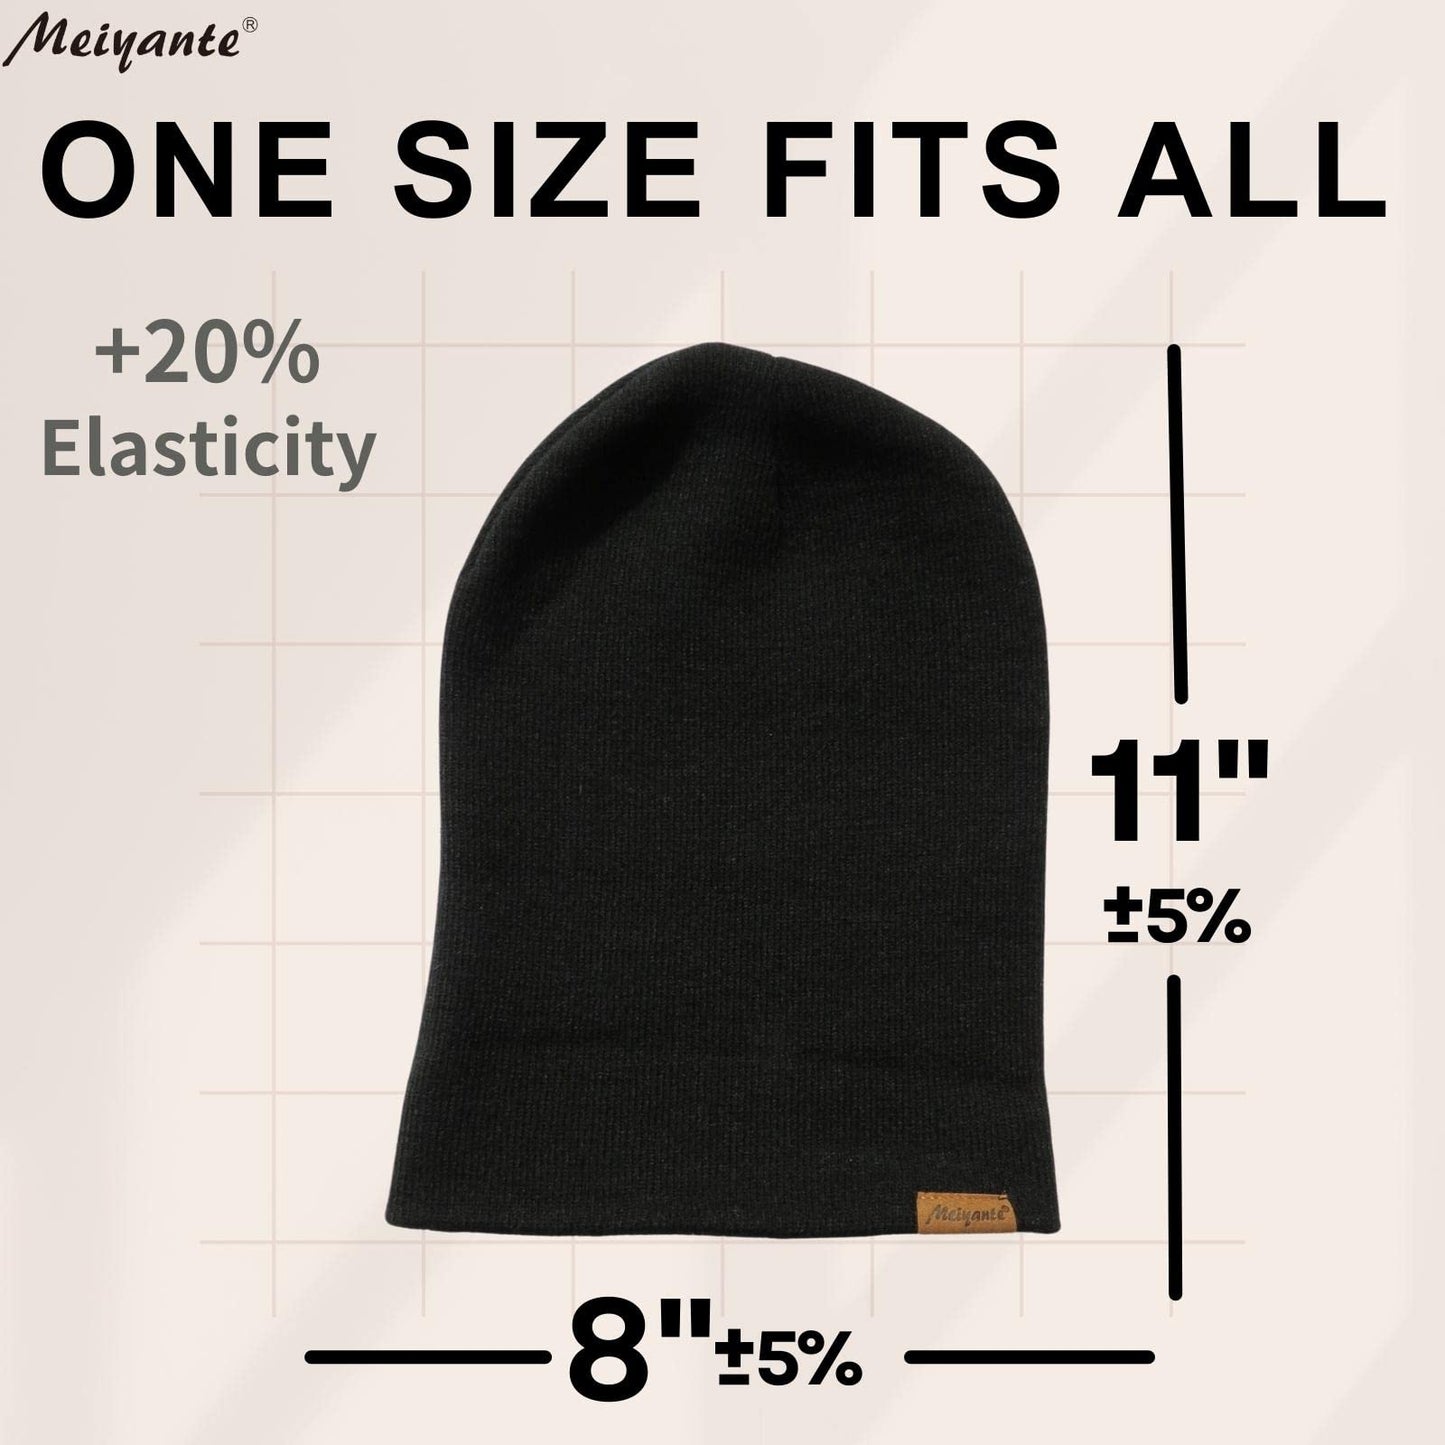 Meiyante Beanie Hats for Men & Women - Warm Stocking Caps for Men & Women, Cuffed Knit Thermal Hats, Gift for Him & Her